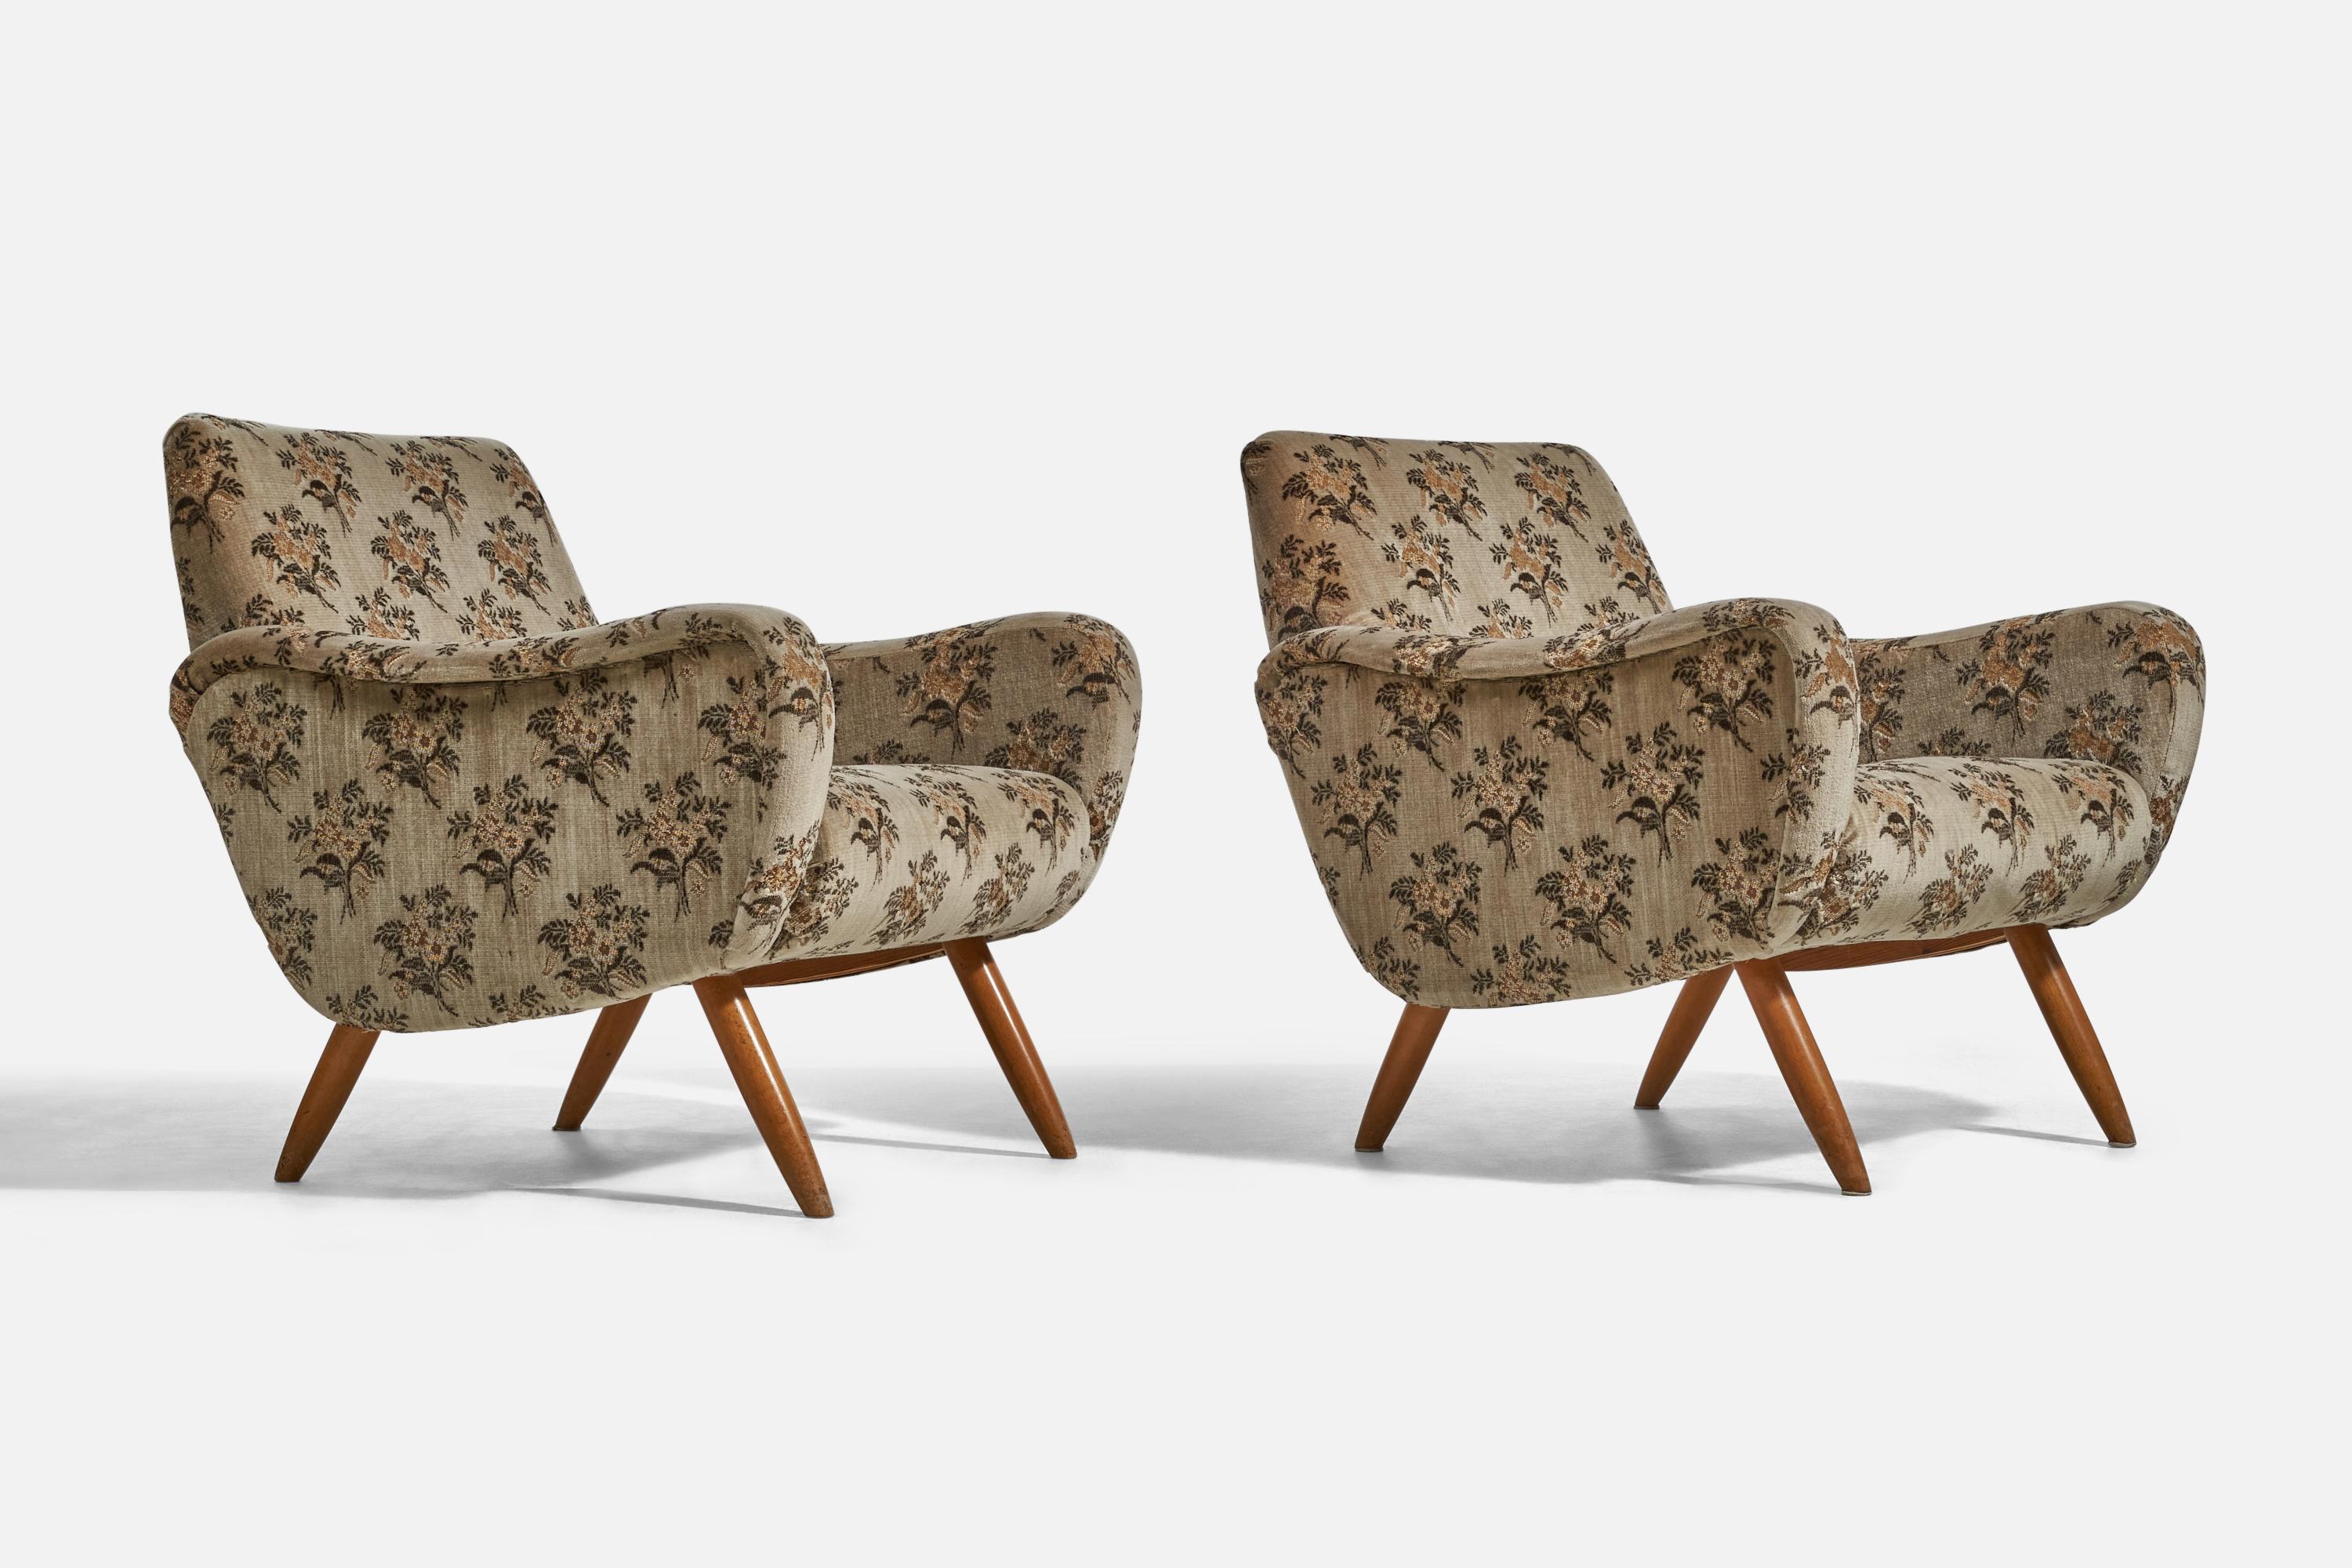 A pair fabric and stained wood lounge chairs designed by Kurt Hvitsjö and produced by Isku, Finland, 1950s.

